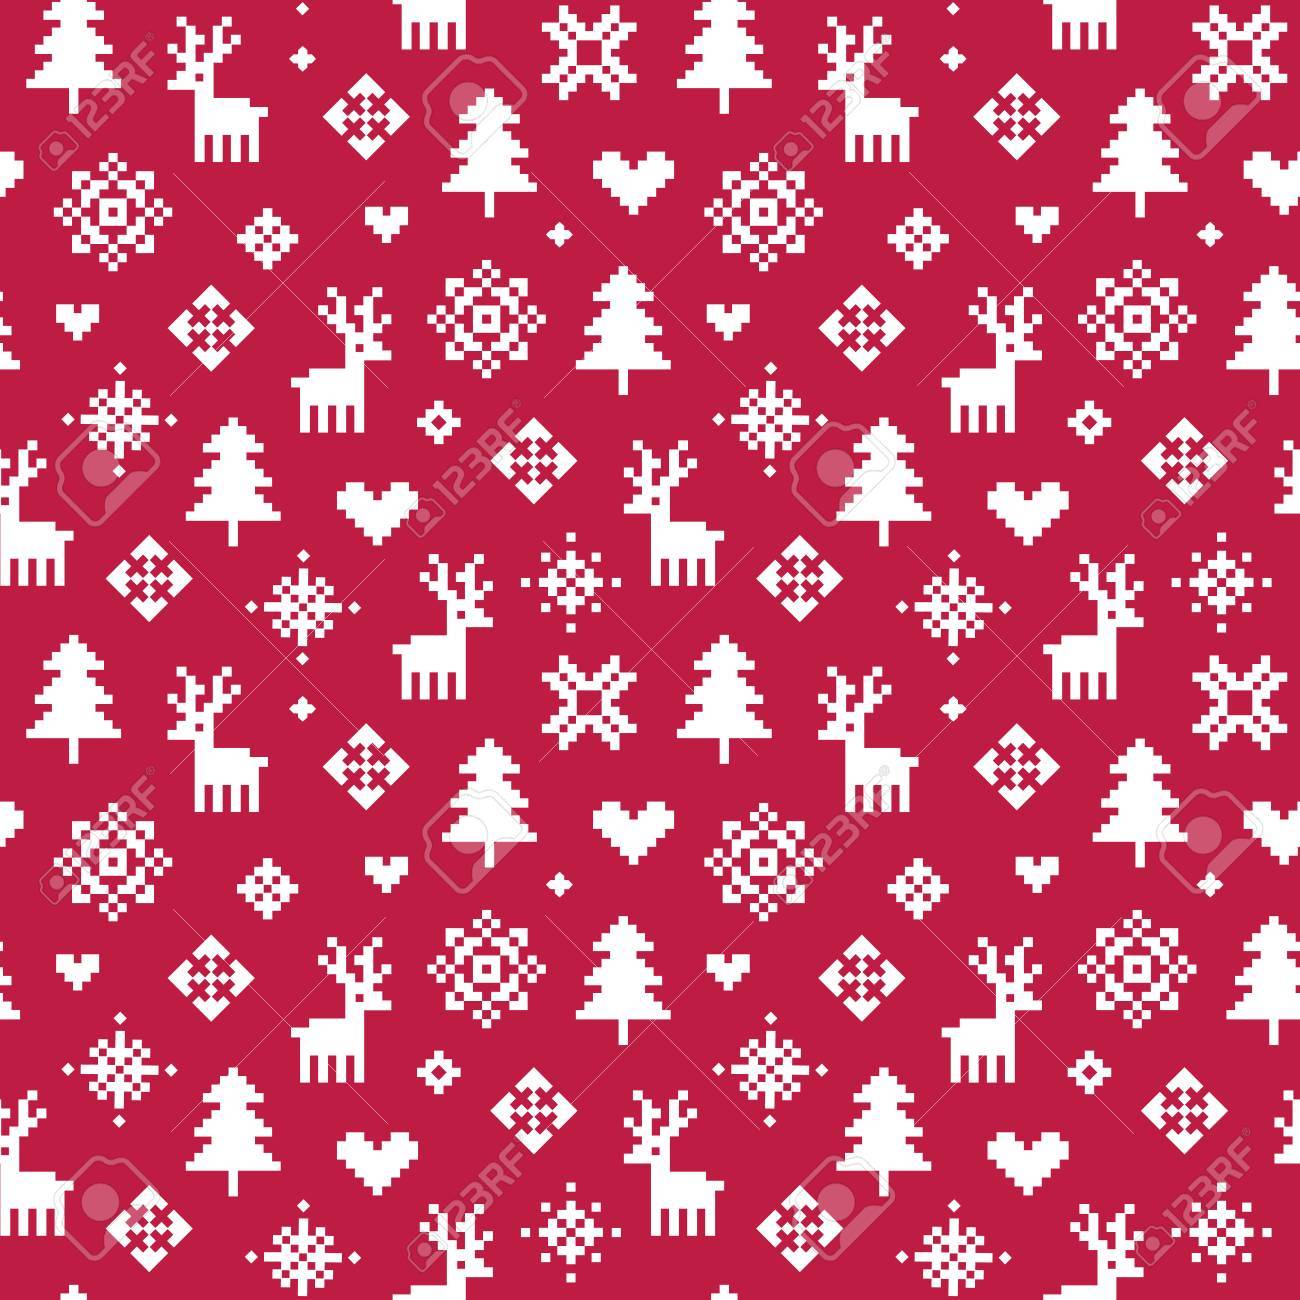 Cute Vector Seamless Winter Holiday Background In Red And White